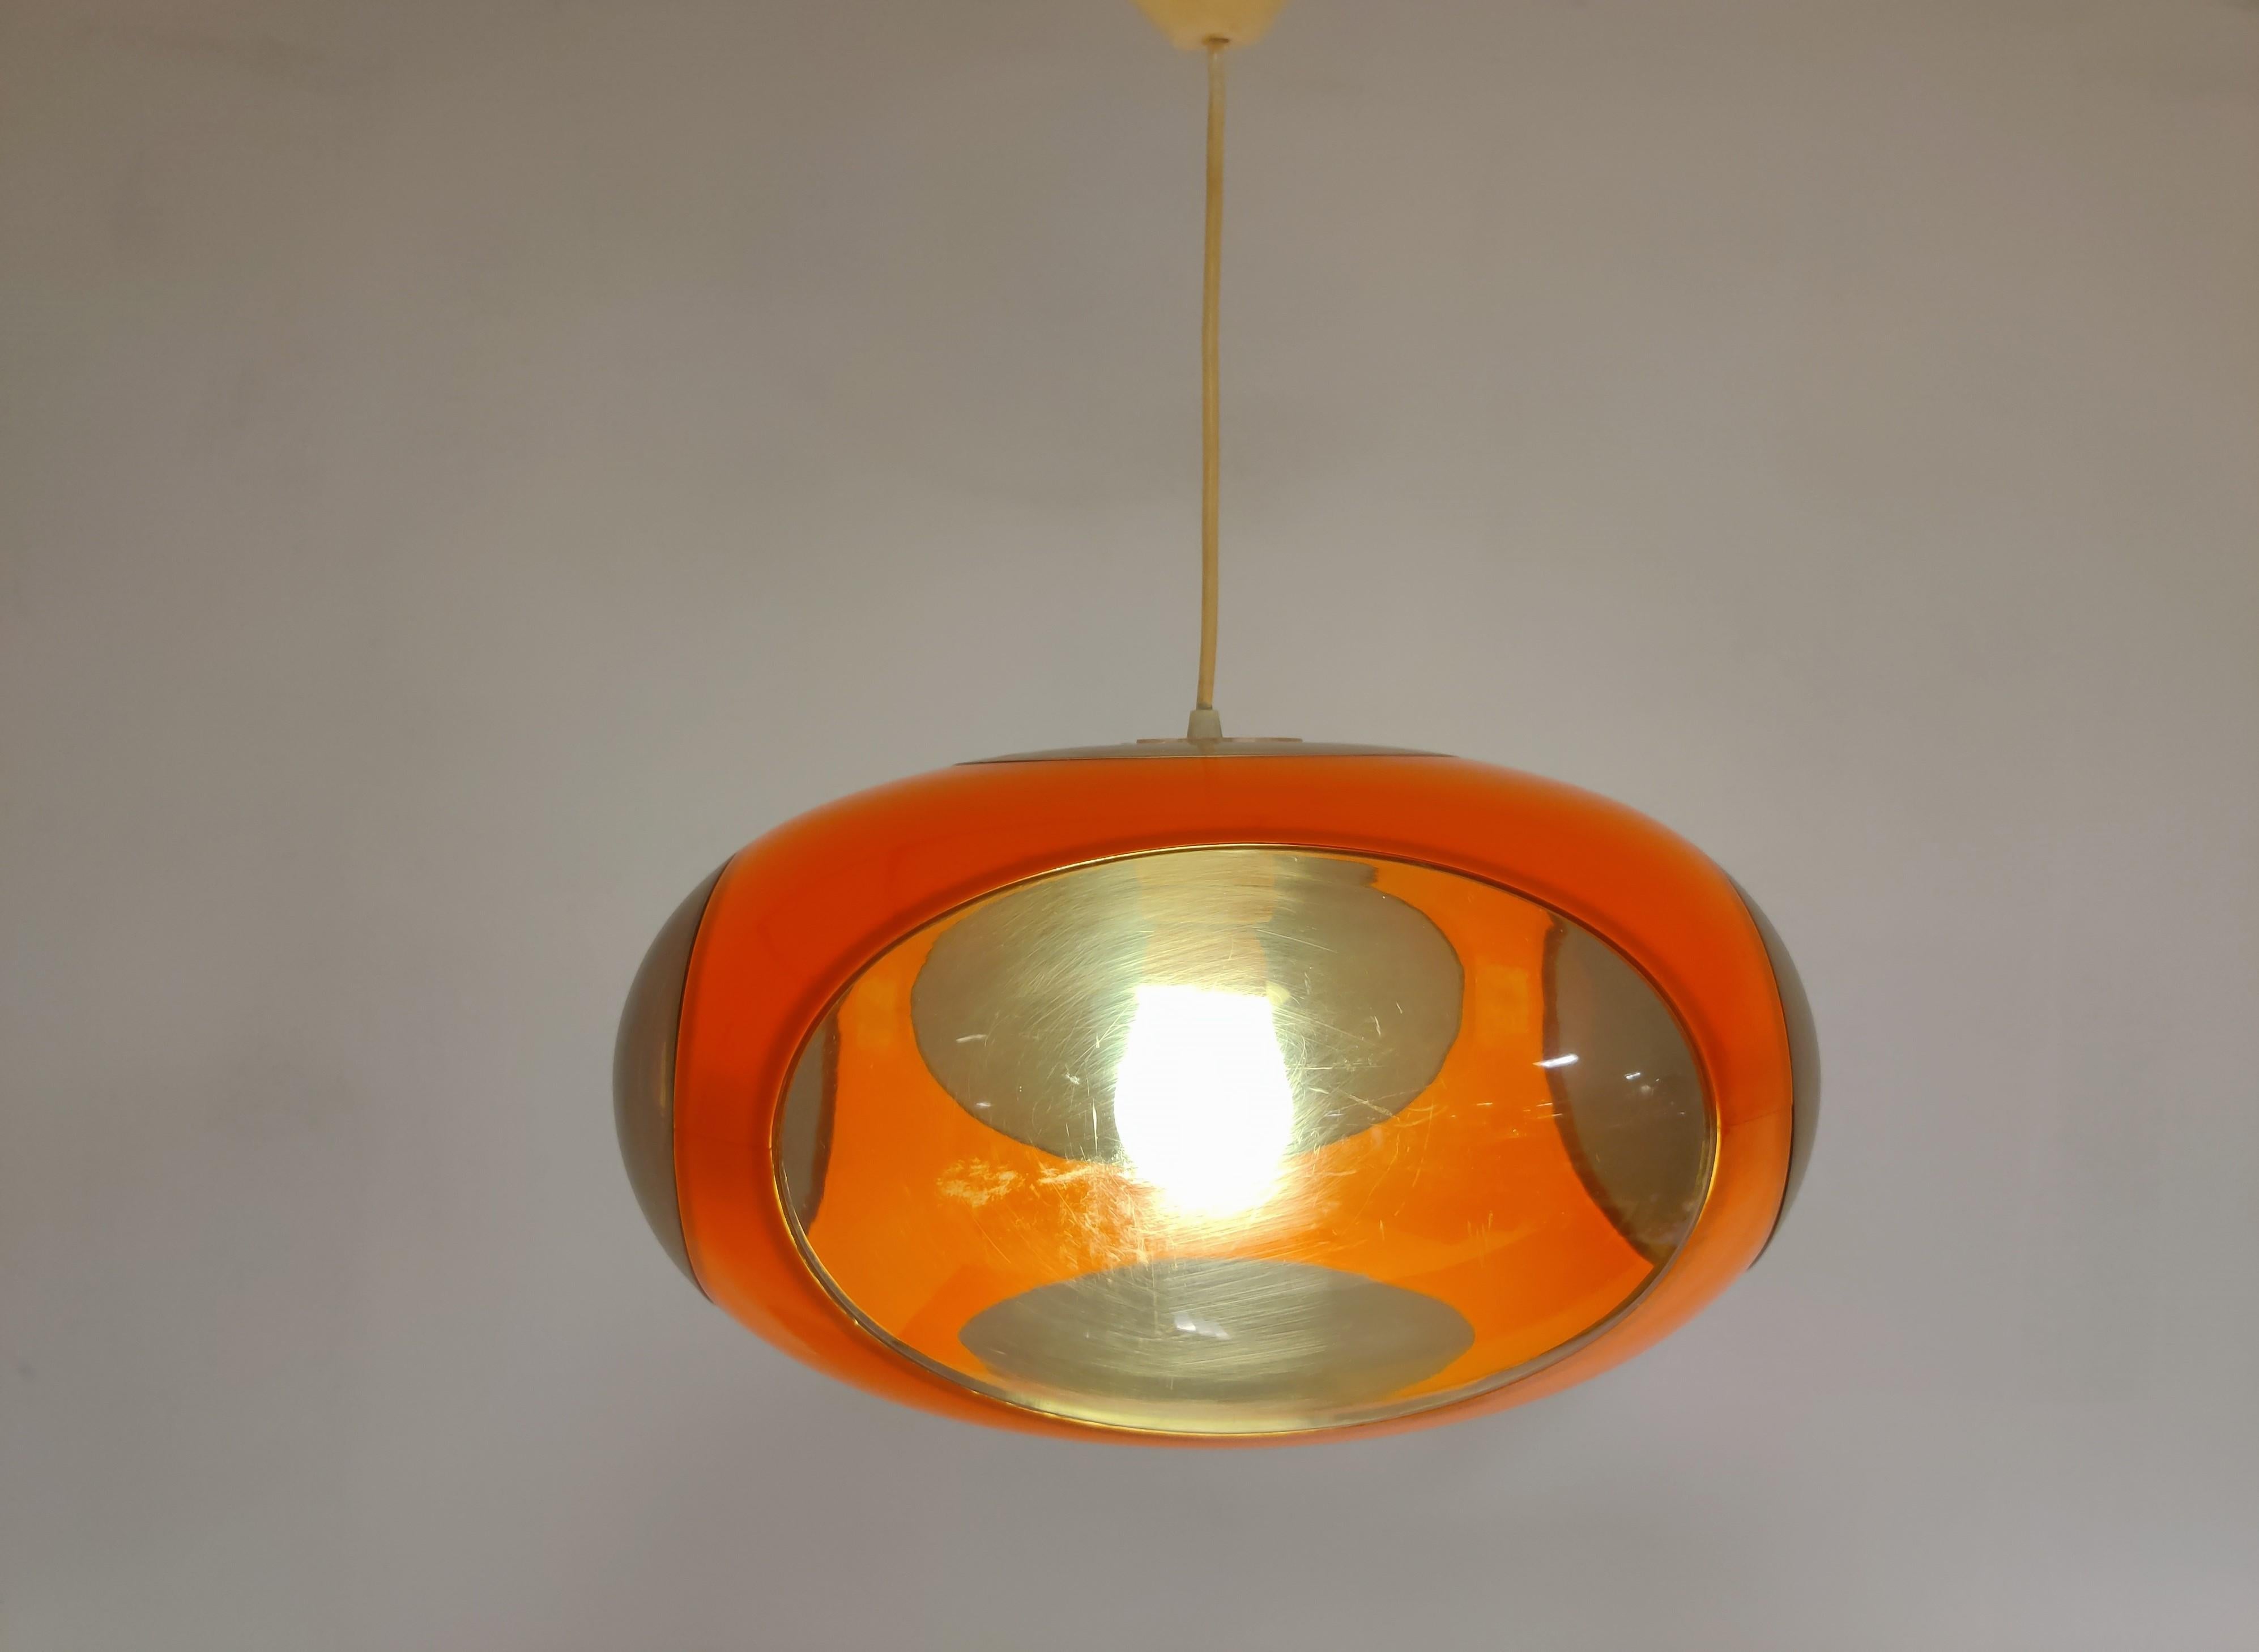 Midcentury Space Age 'bug eye' or ufo pendant light by Massive.

The lamp is mostly referred to as Luigi Colani design but is not correct. These where produced in Belgium by a lighting company called Massive.

Nevertheless it is a great original